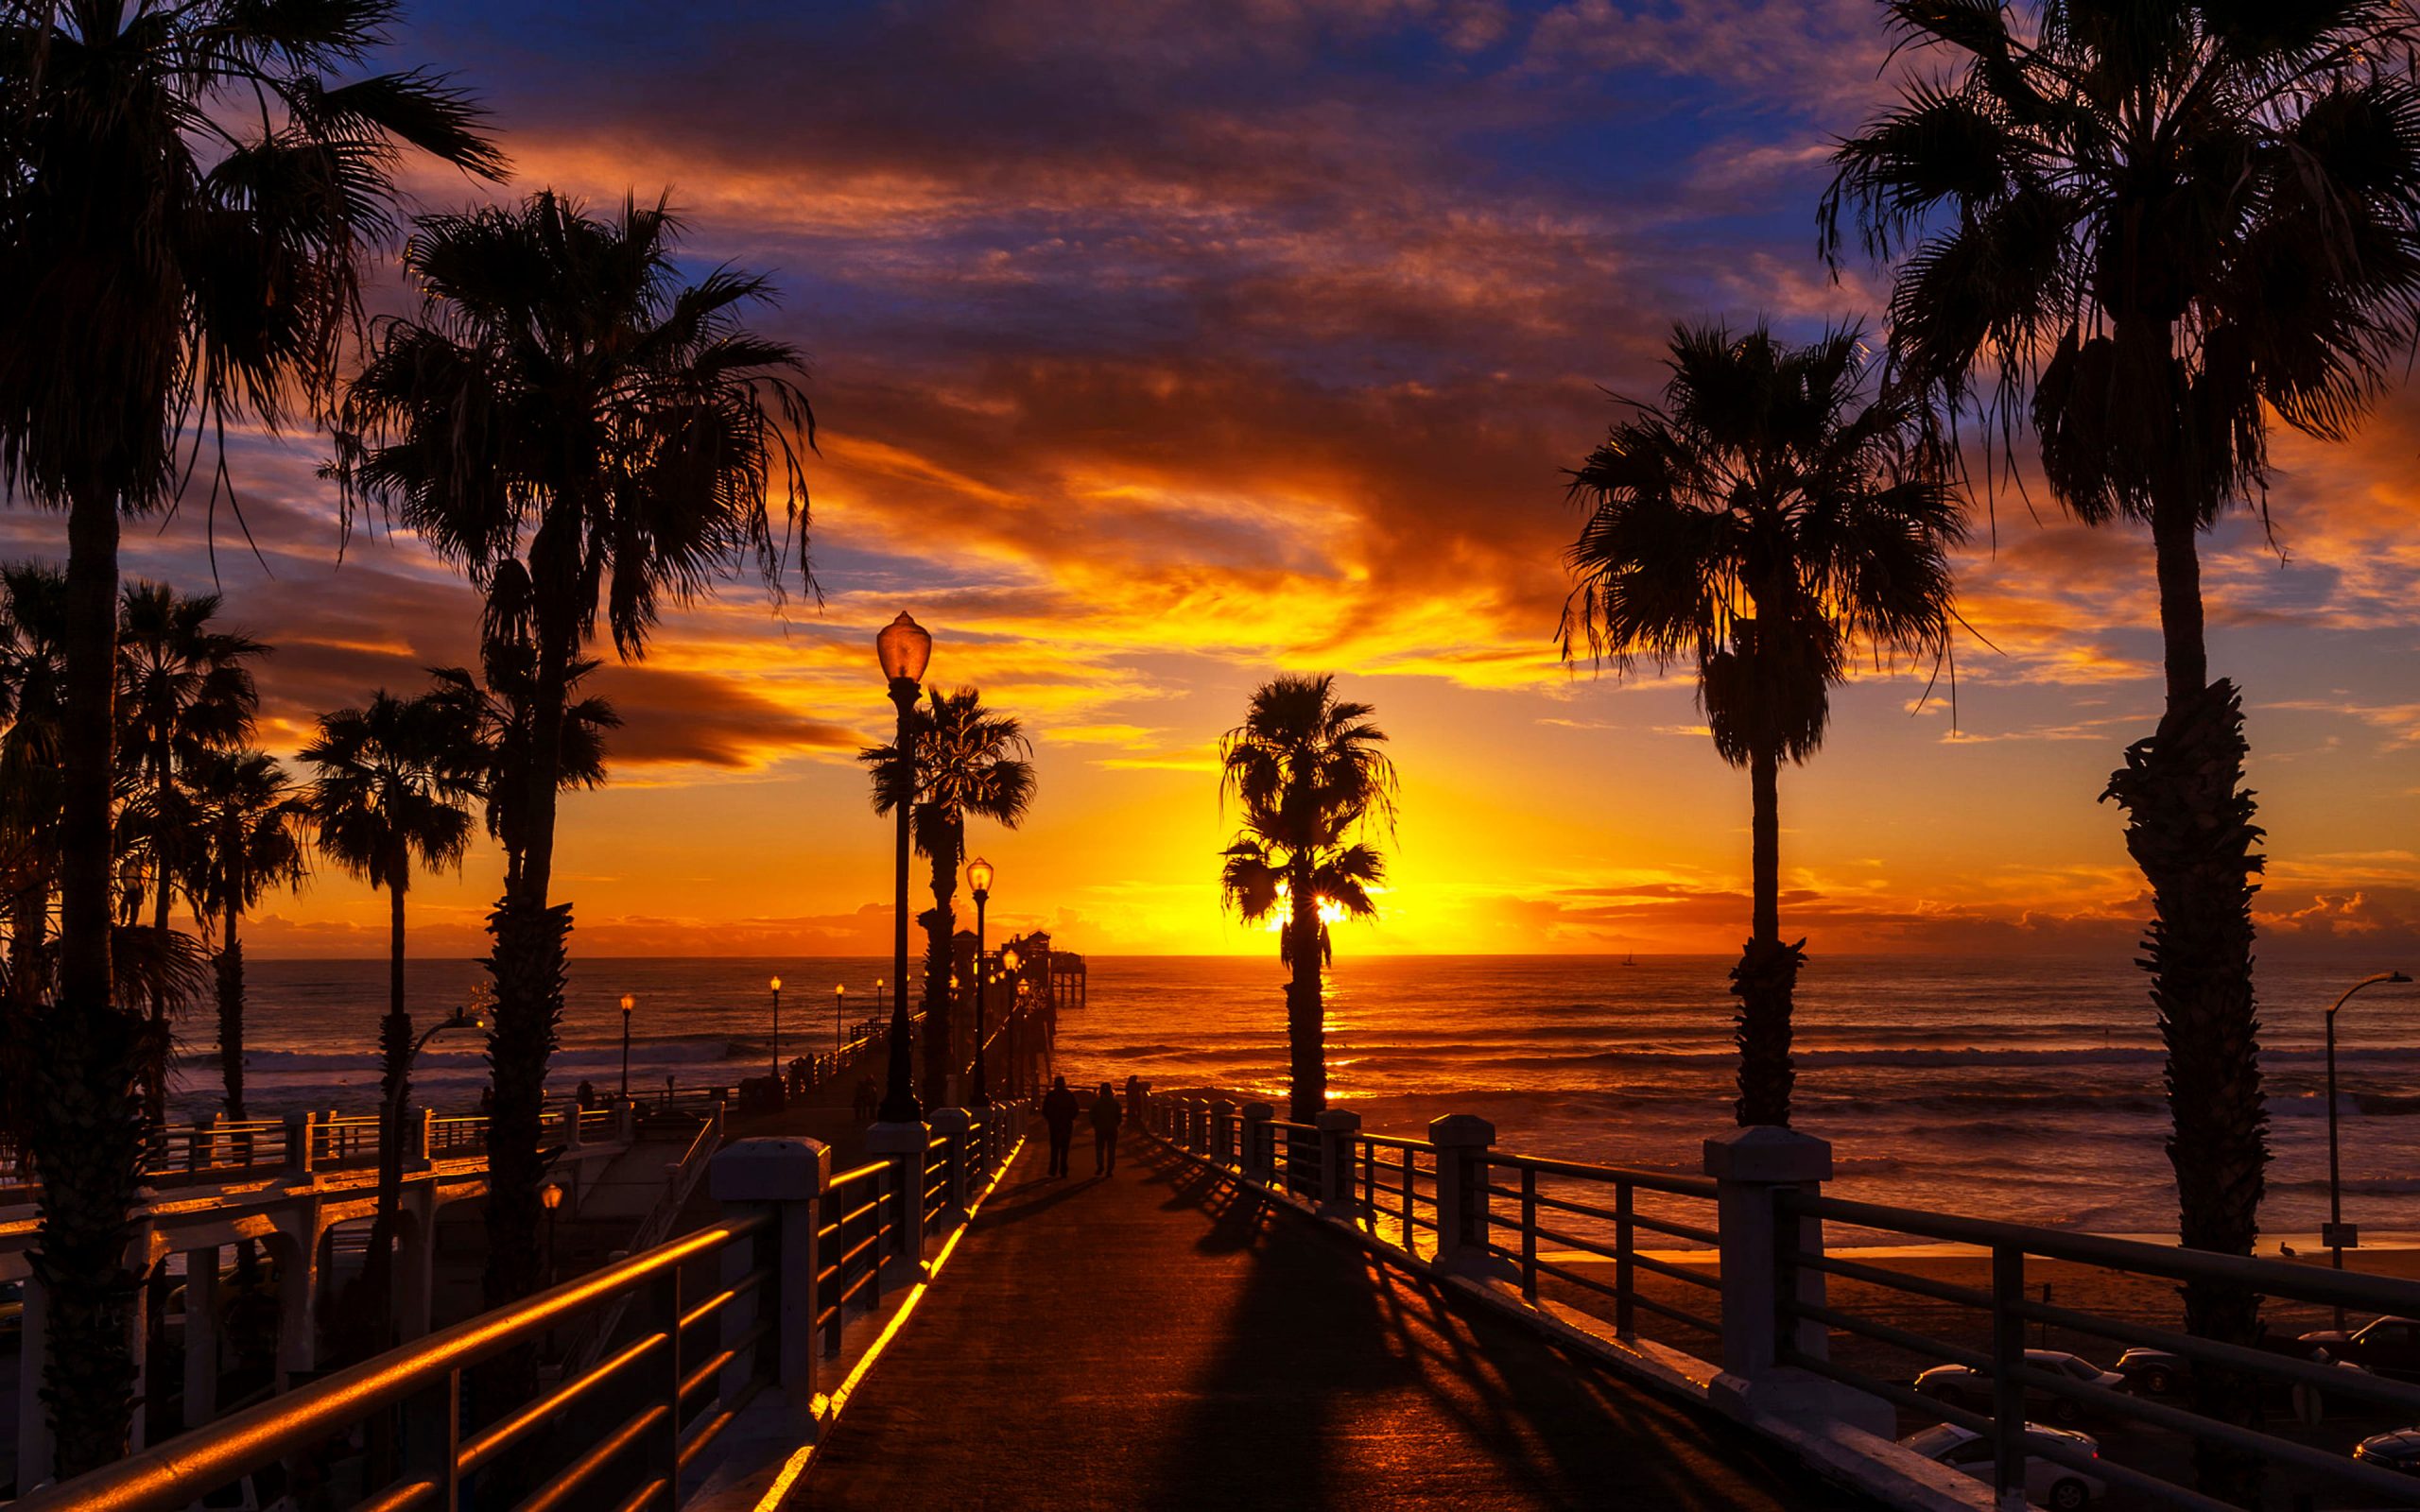 Sunset At The Oceanside Pier In The North County Of San Diego California Desktop Hd Wallpaper For Mobile Phones Tablet And Pc 3840×2400